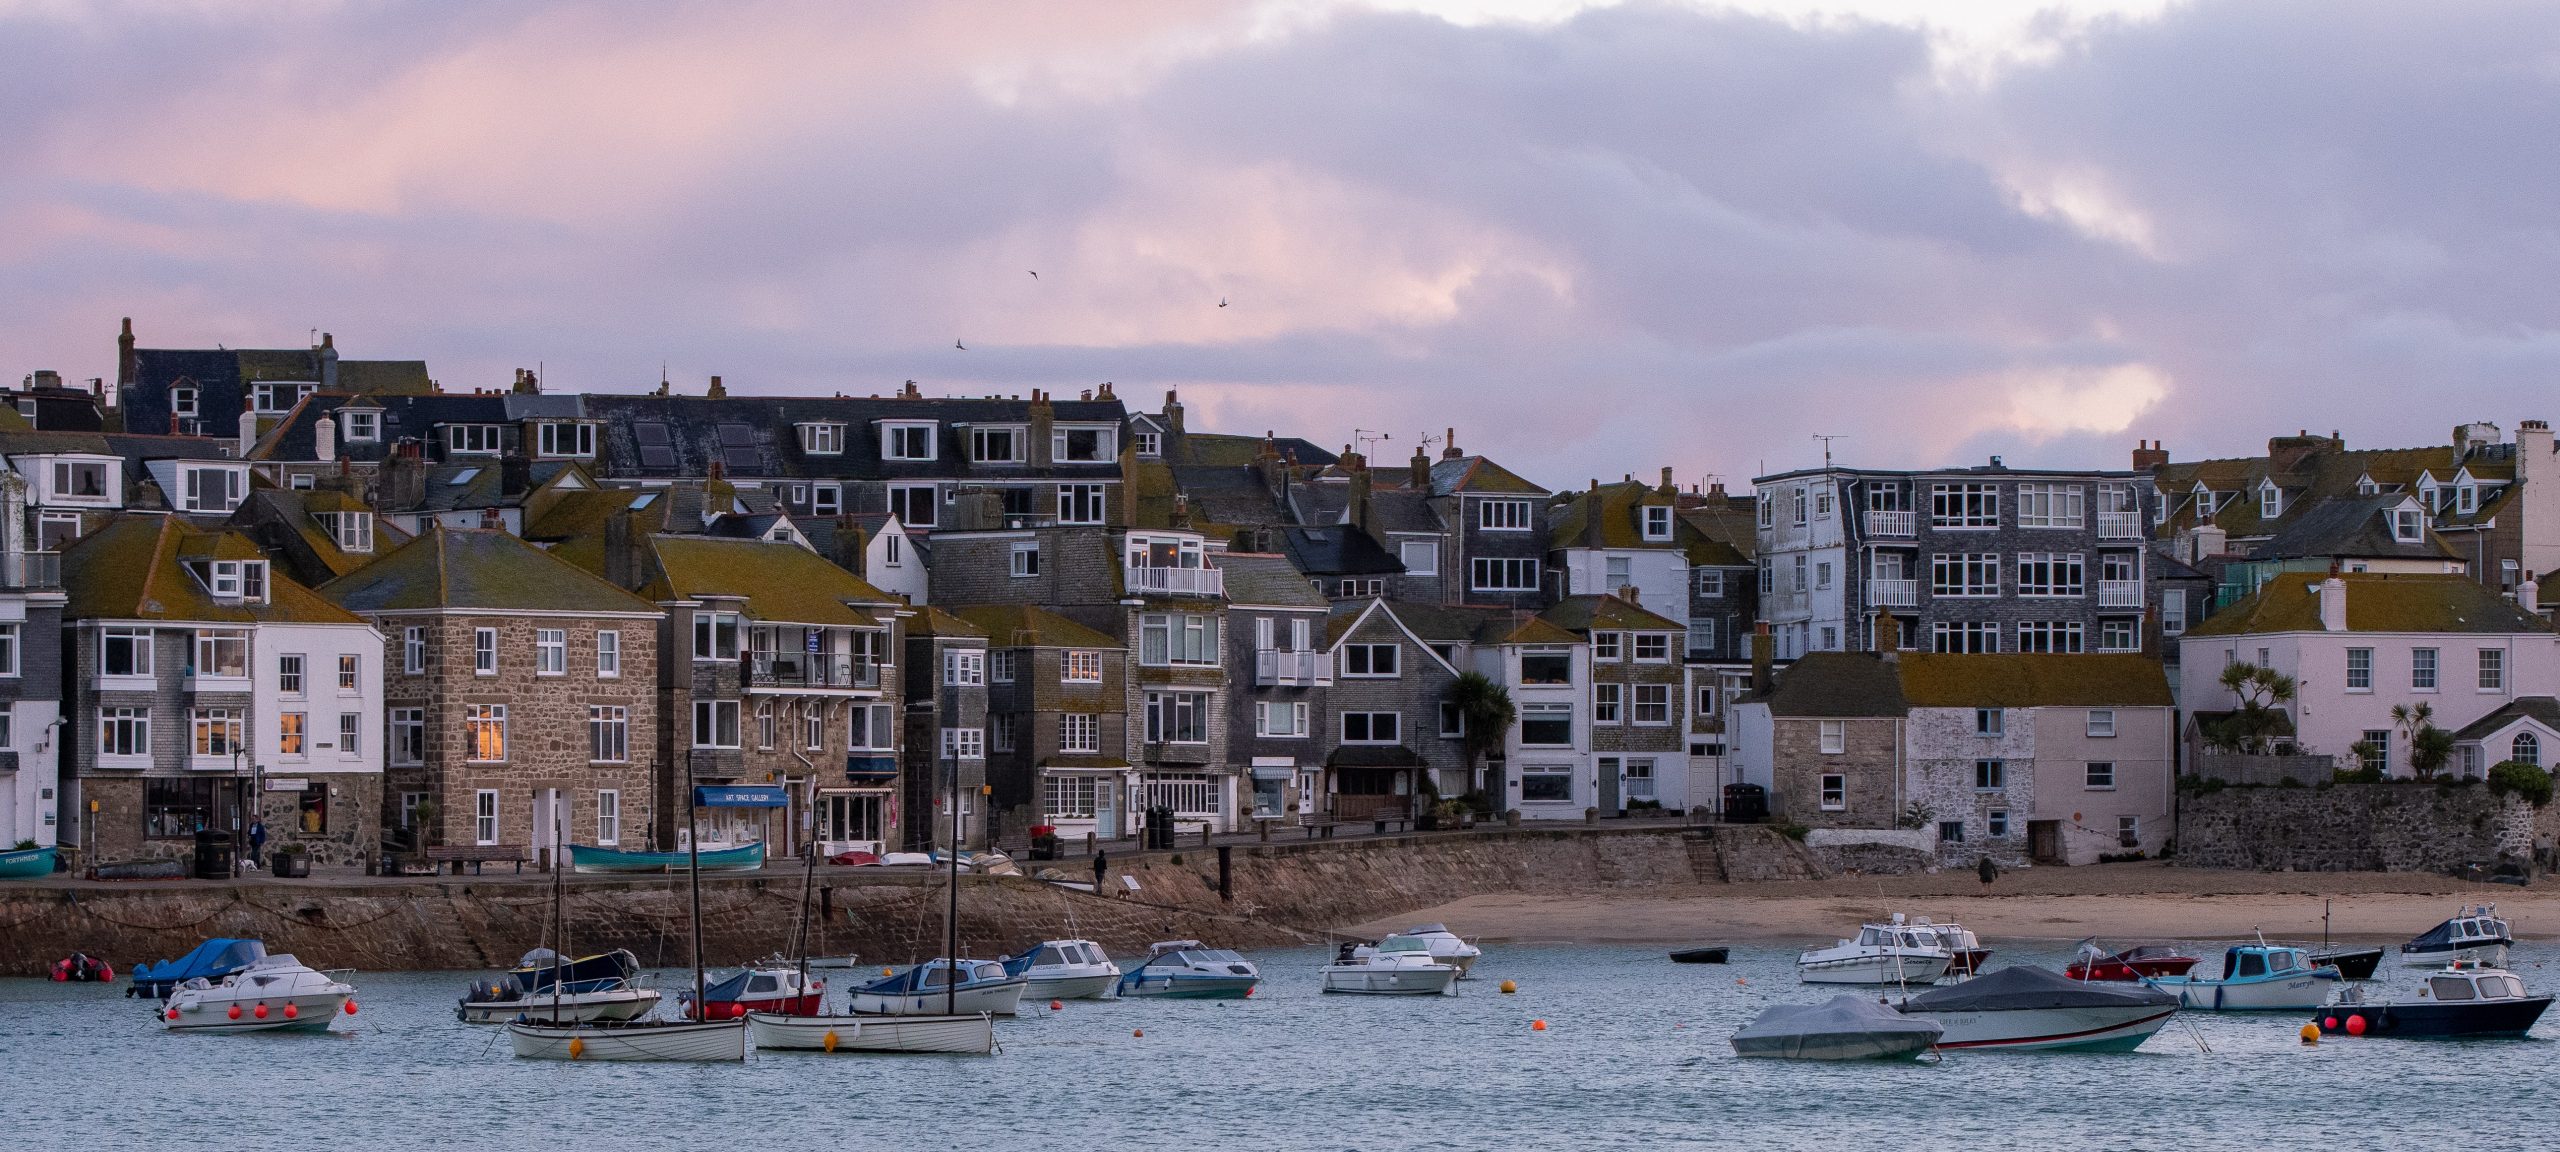 St Ives buildings during sunset